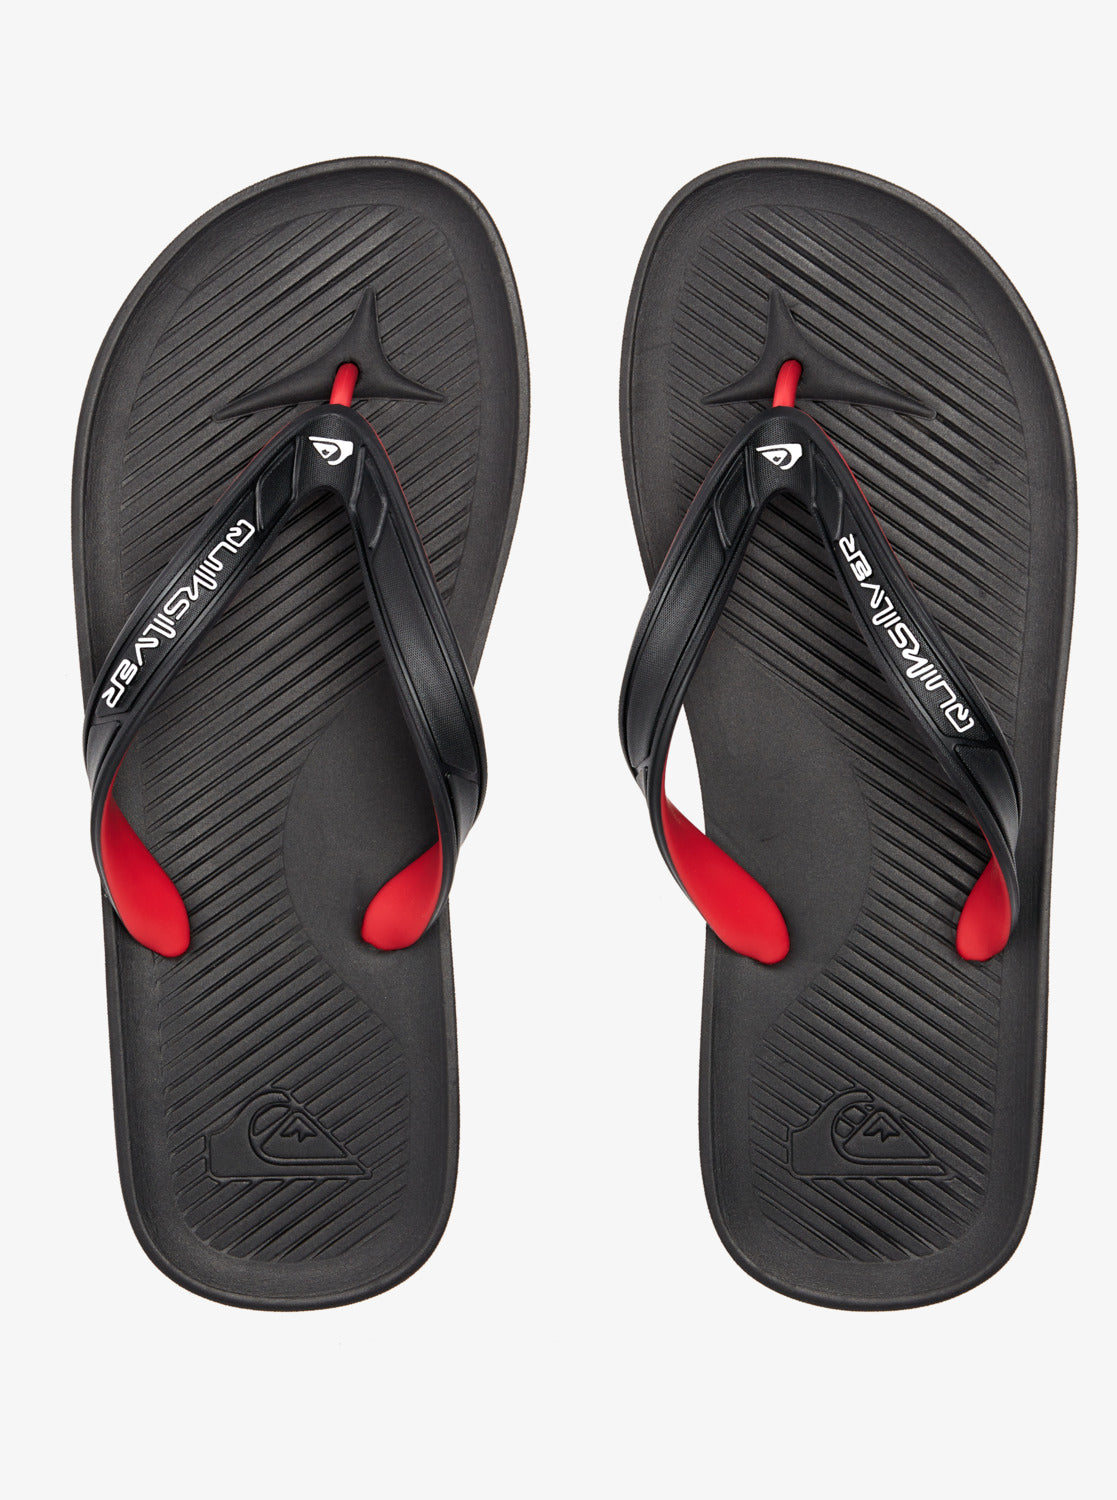 Quiksilver Haleiwa Core Jandals in black 3 colourway, black, red, green, yellow